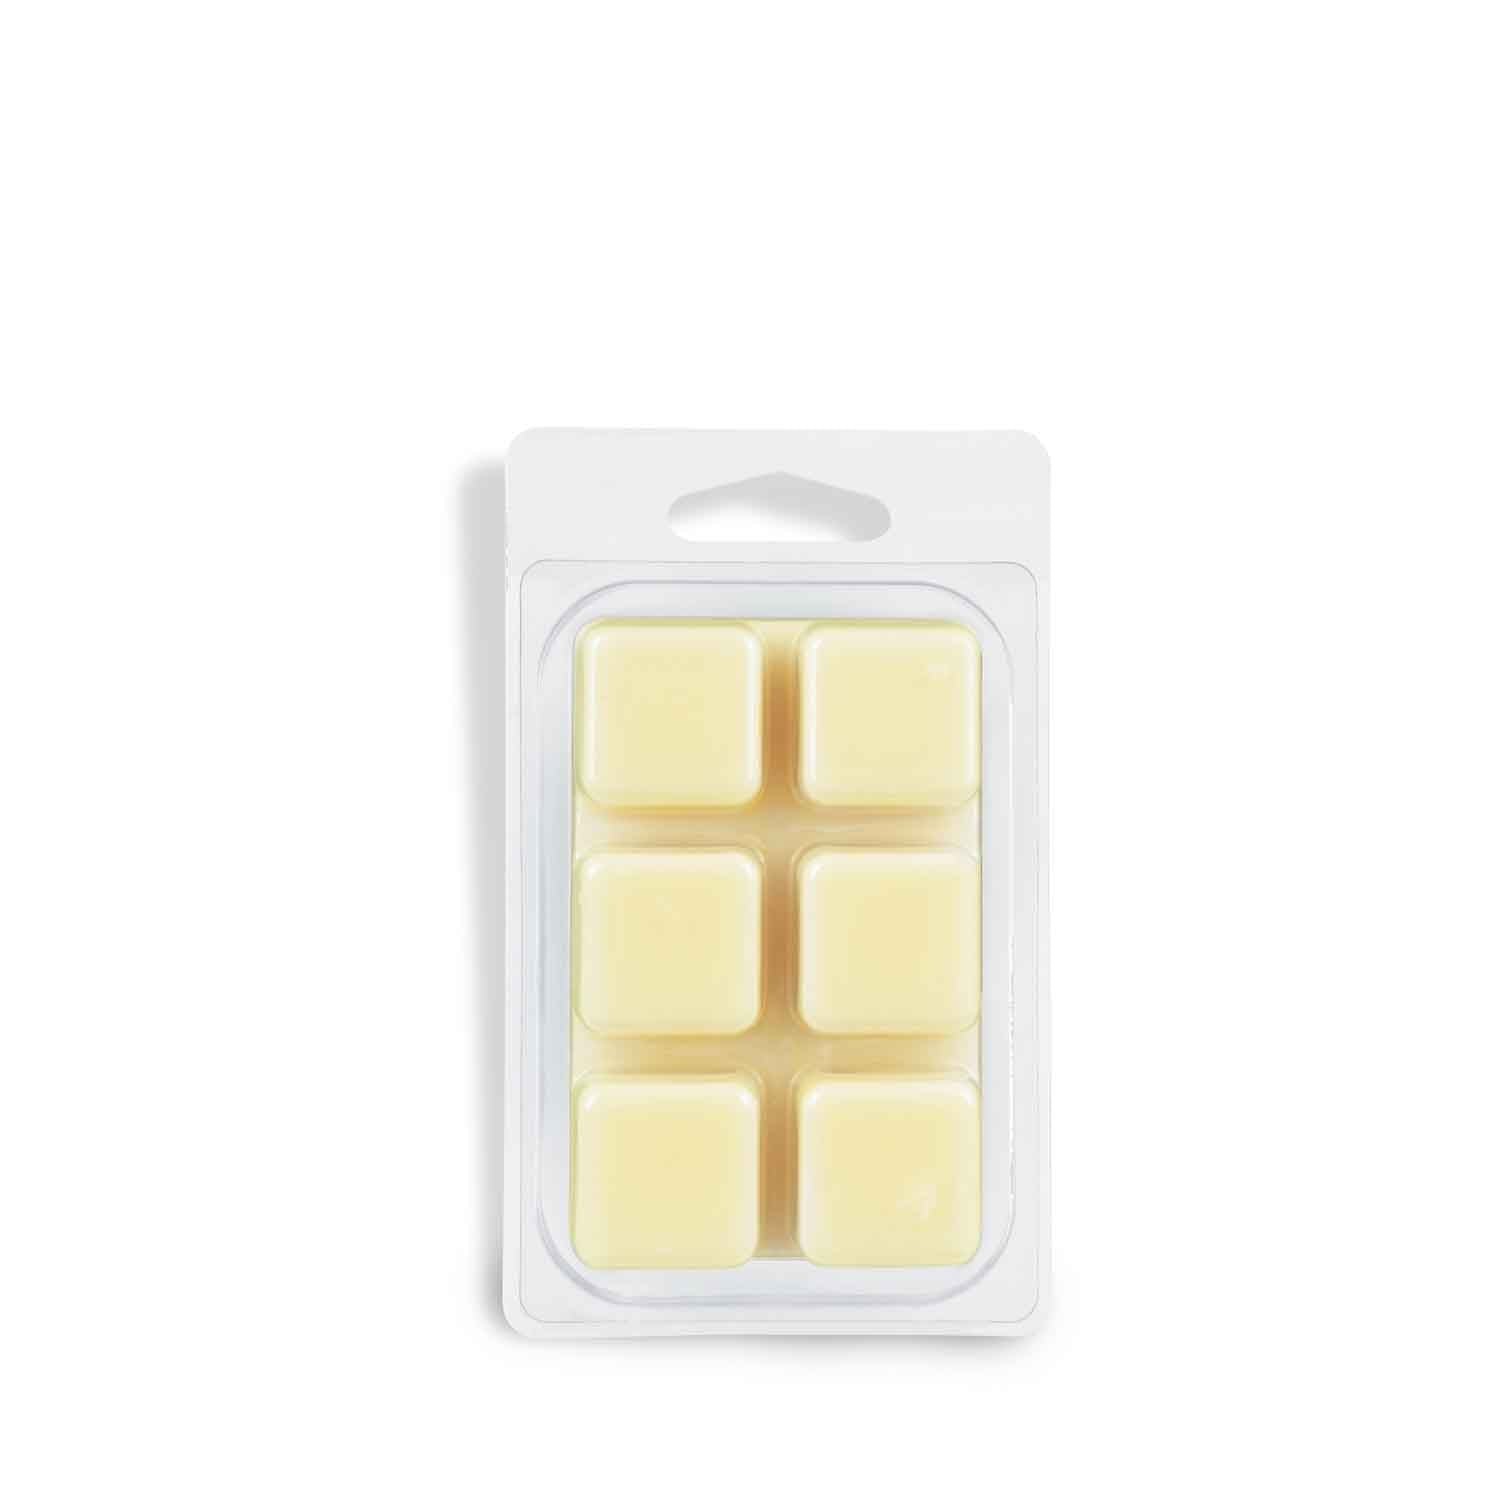 A pack of Tuscany Candle® Spiced Ground Vanilla Scented Wax Melts (2.5 oz), perfect for wax melts, on a white background.